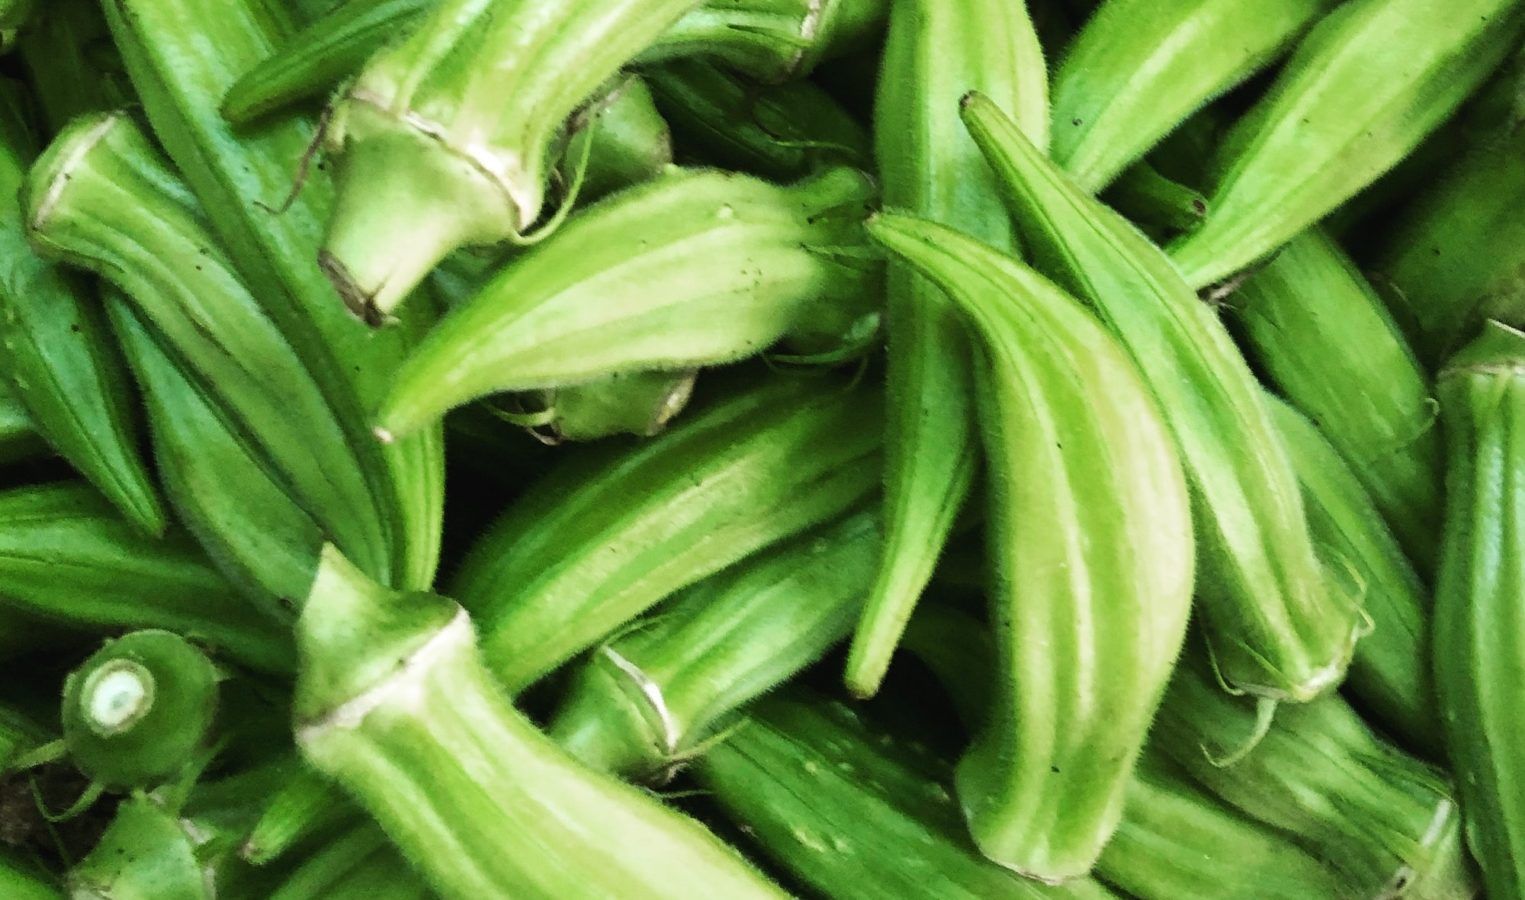 How to prepare okra, an underrated summer vegetable you really should try